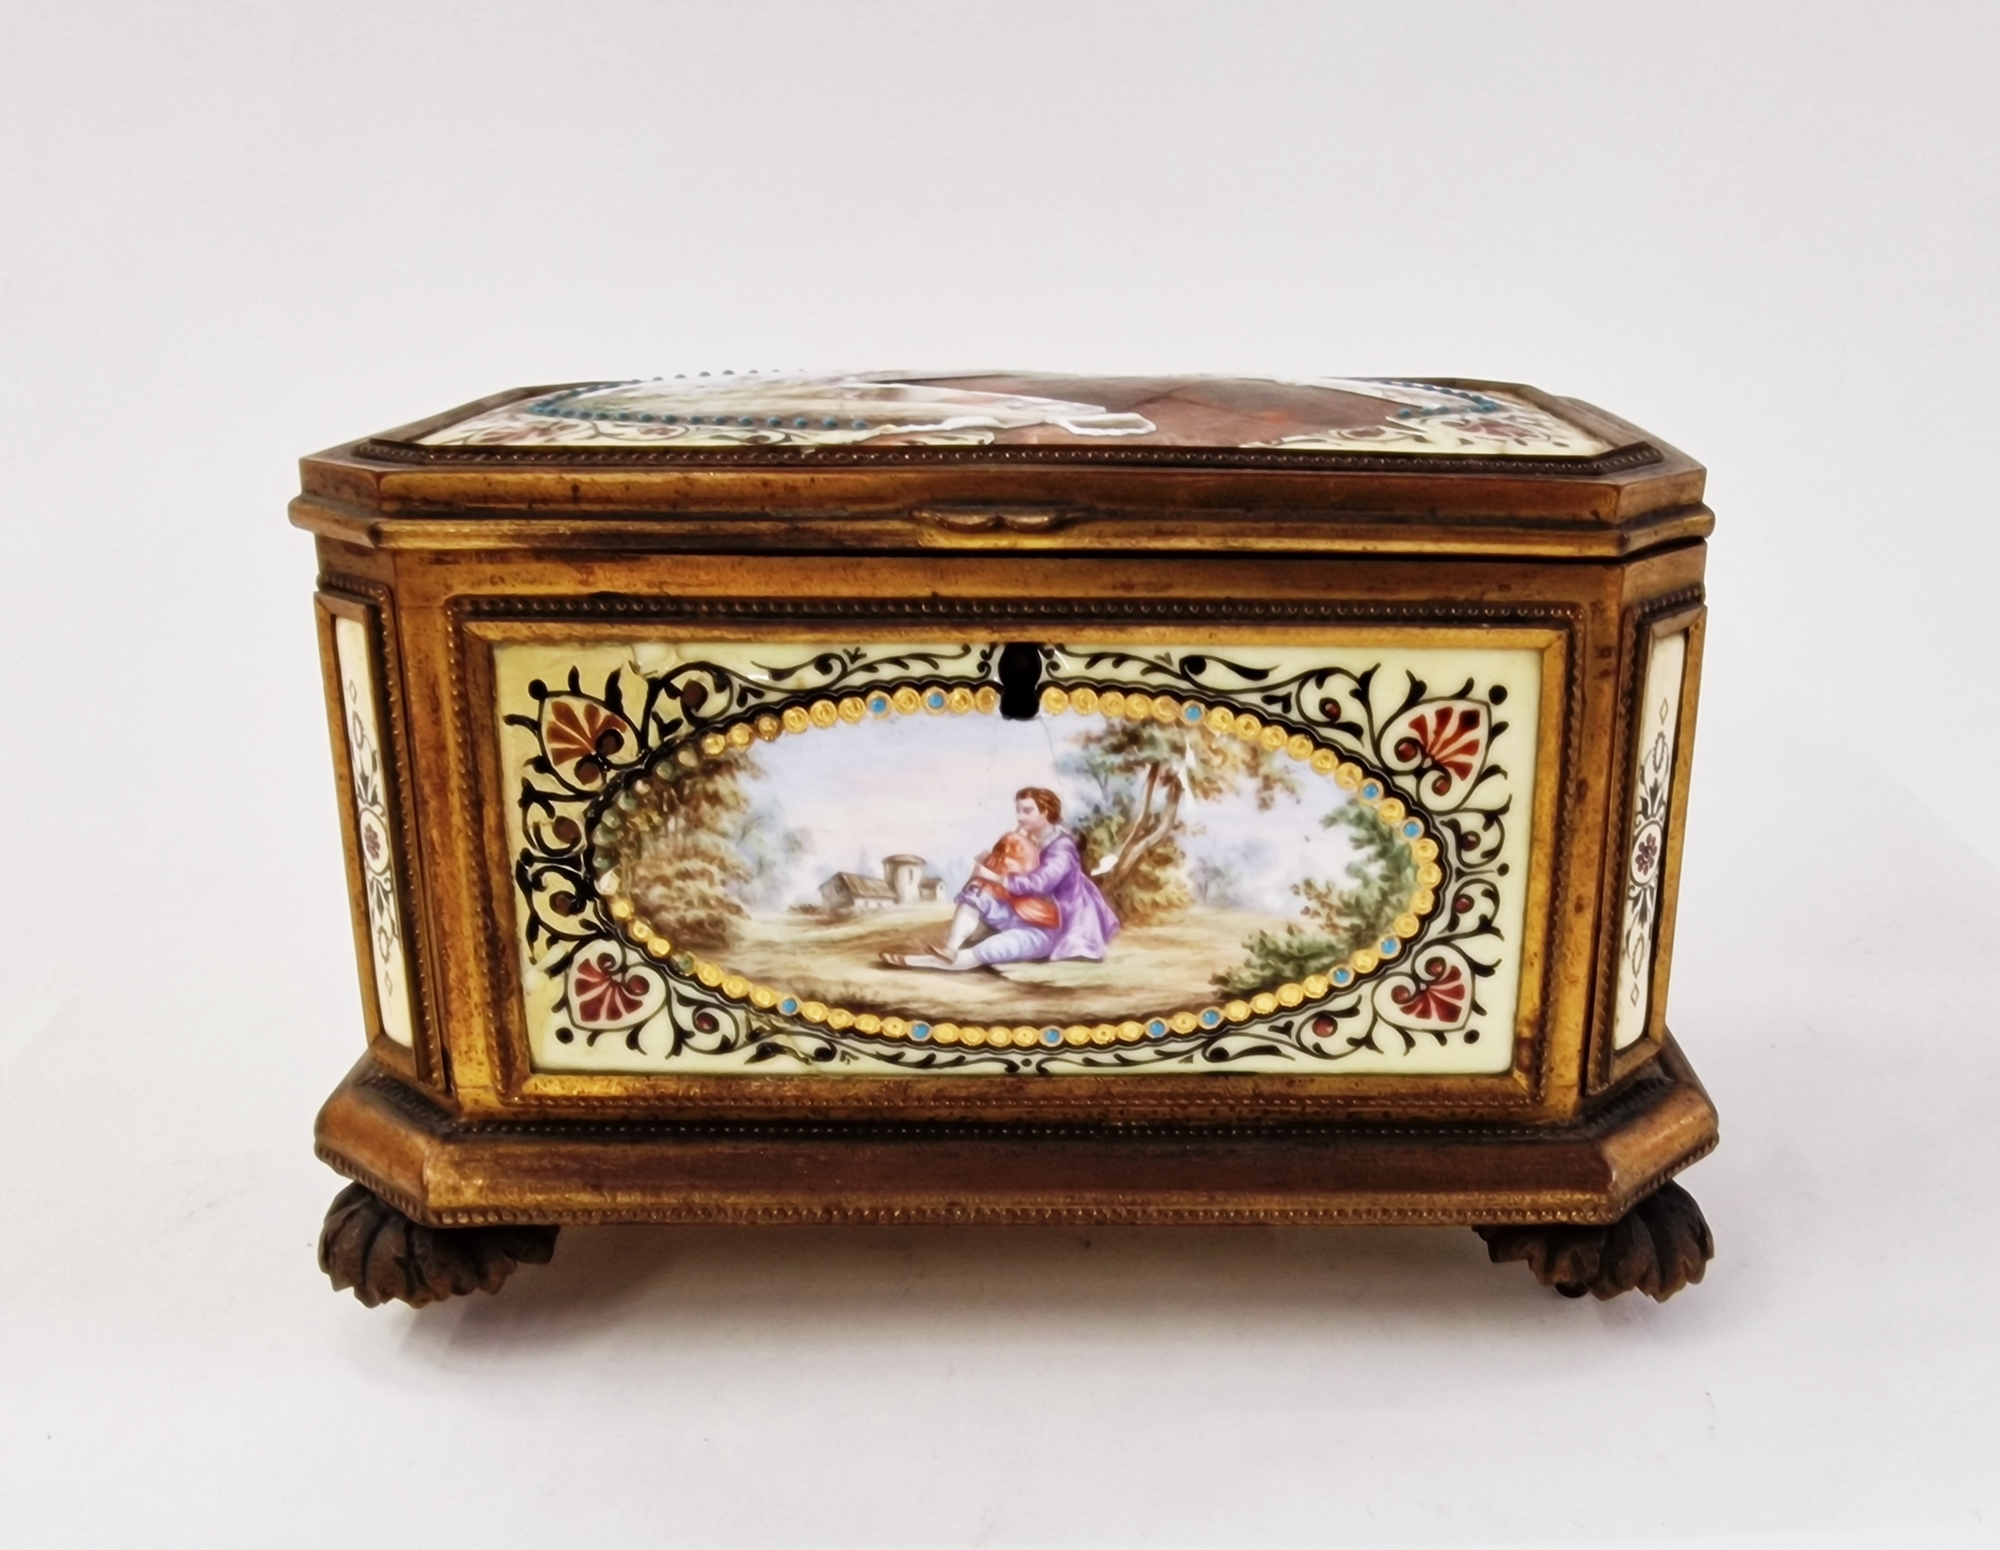 Late 19th century French enamel and gilt metal-mounted jewellery casket, of canted rectangular